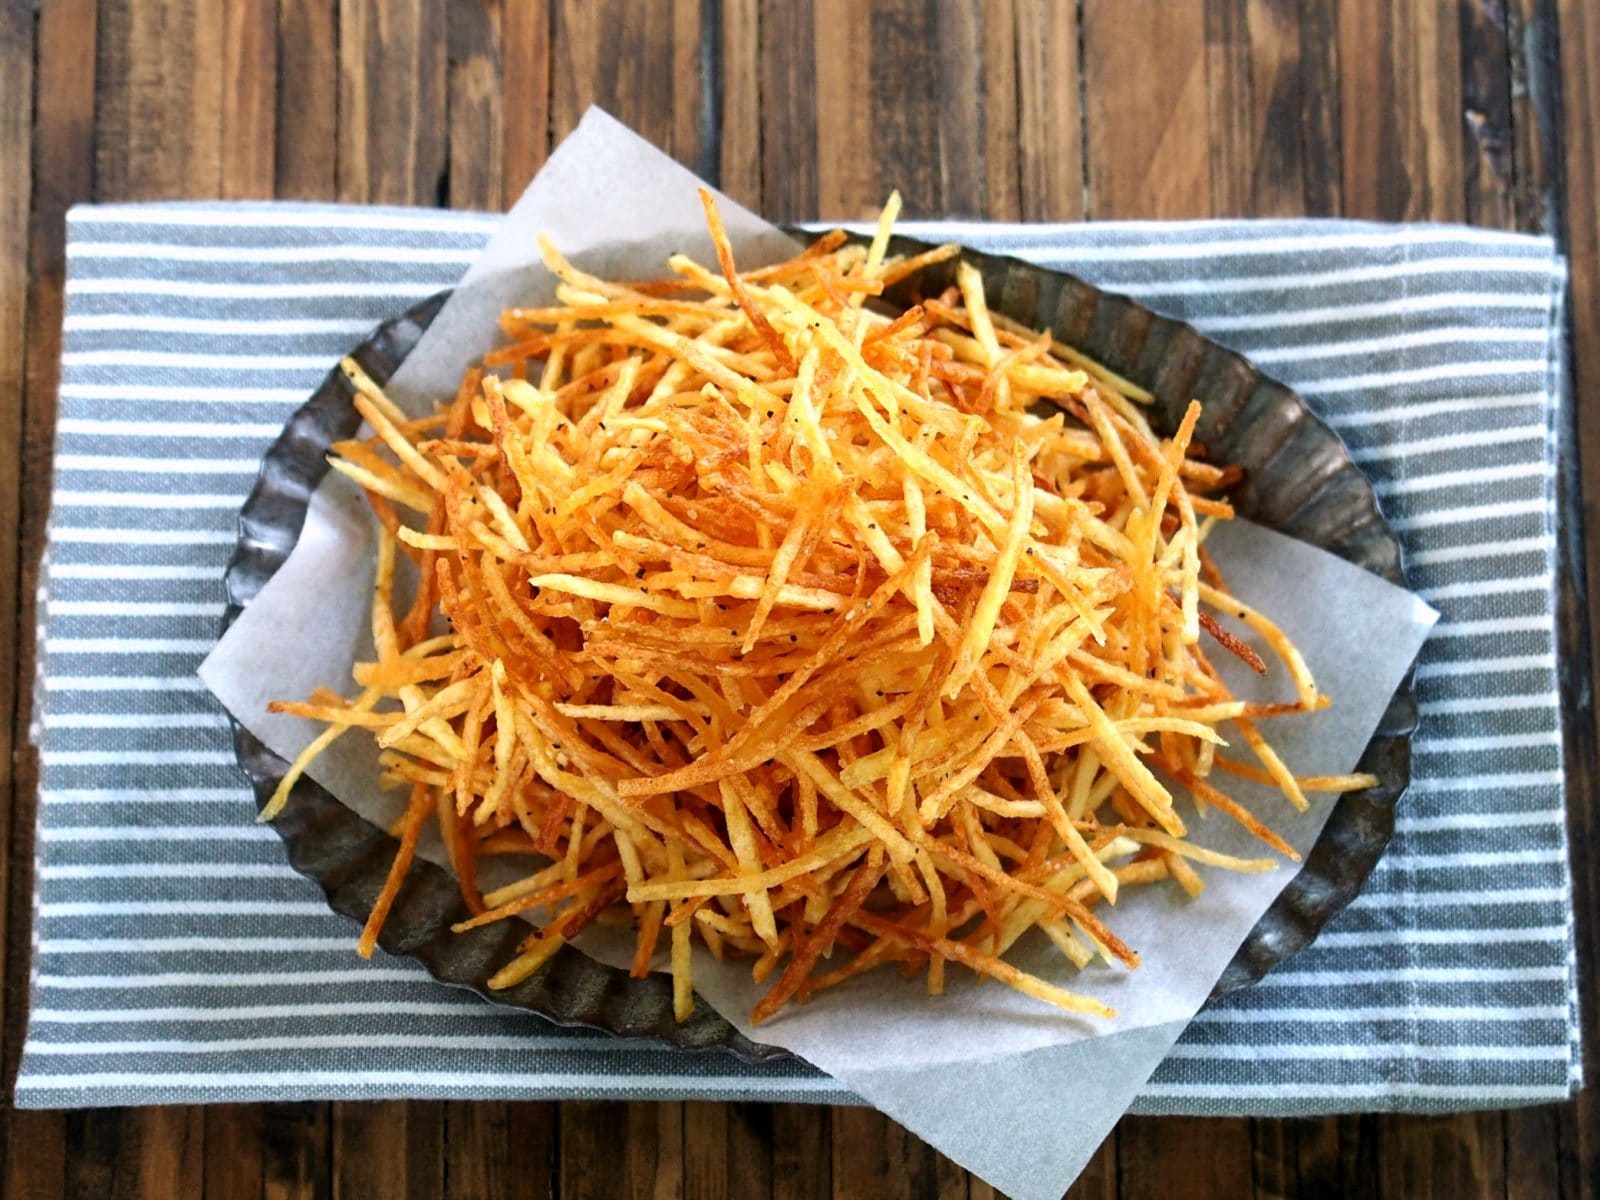 Crispy Crunchy Shoestring Potatoes. Matchstick potatoes deep-fried until golden brown then perfectly seasoned. Simple, delicious and addicting. Simply Sated